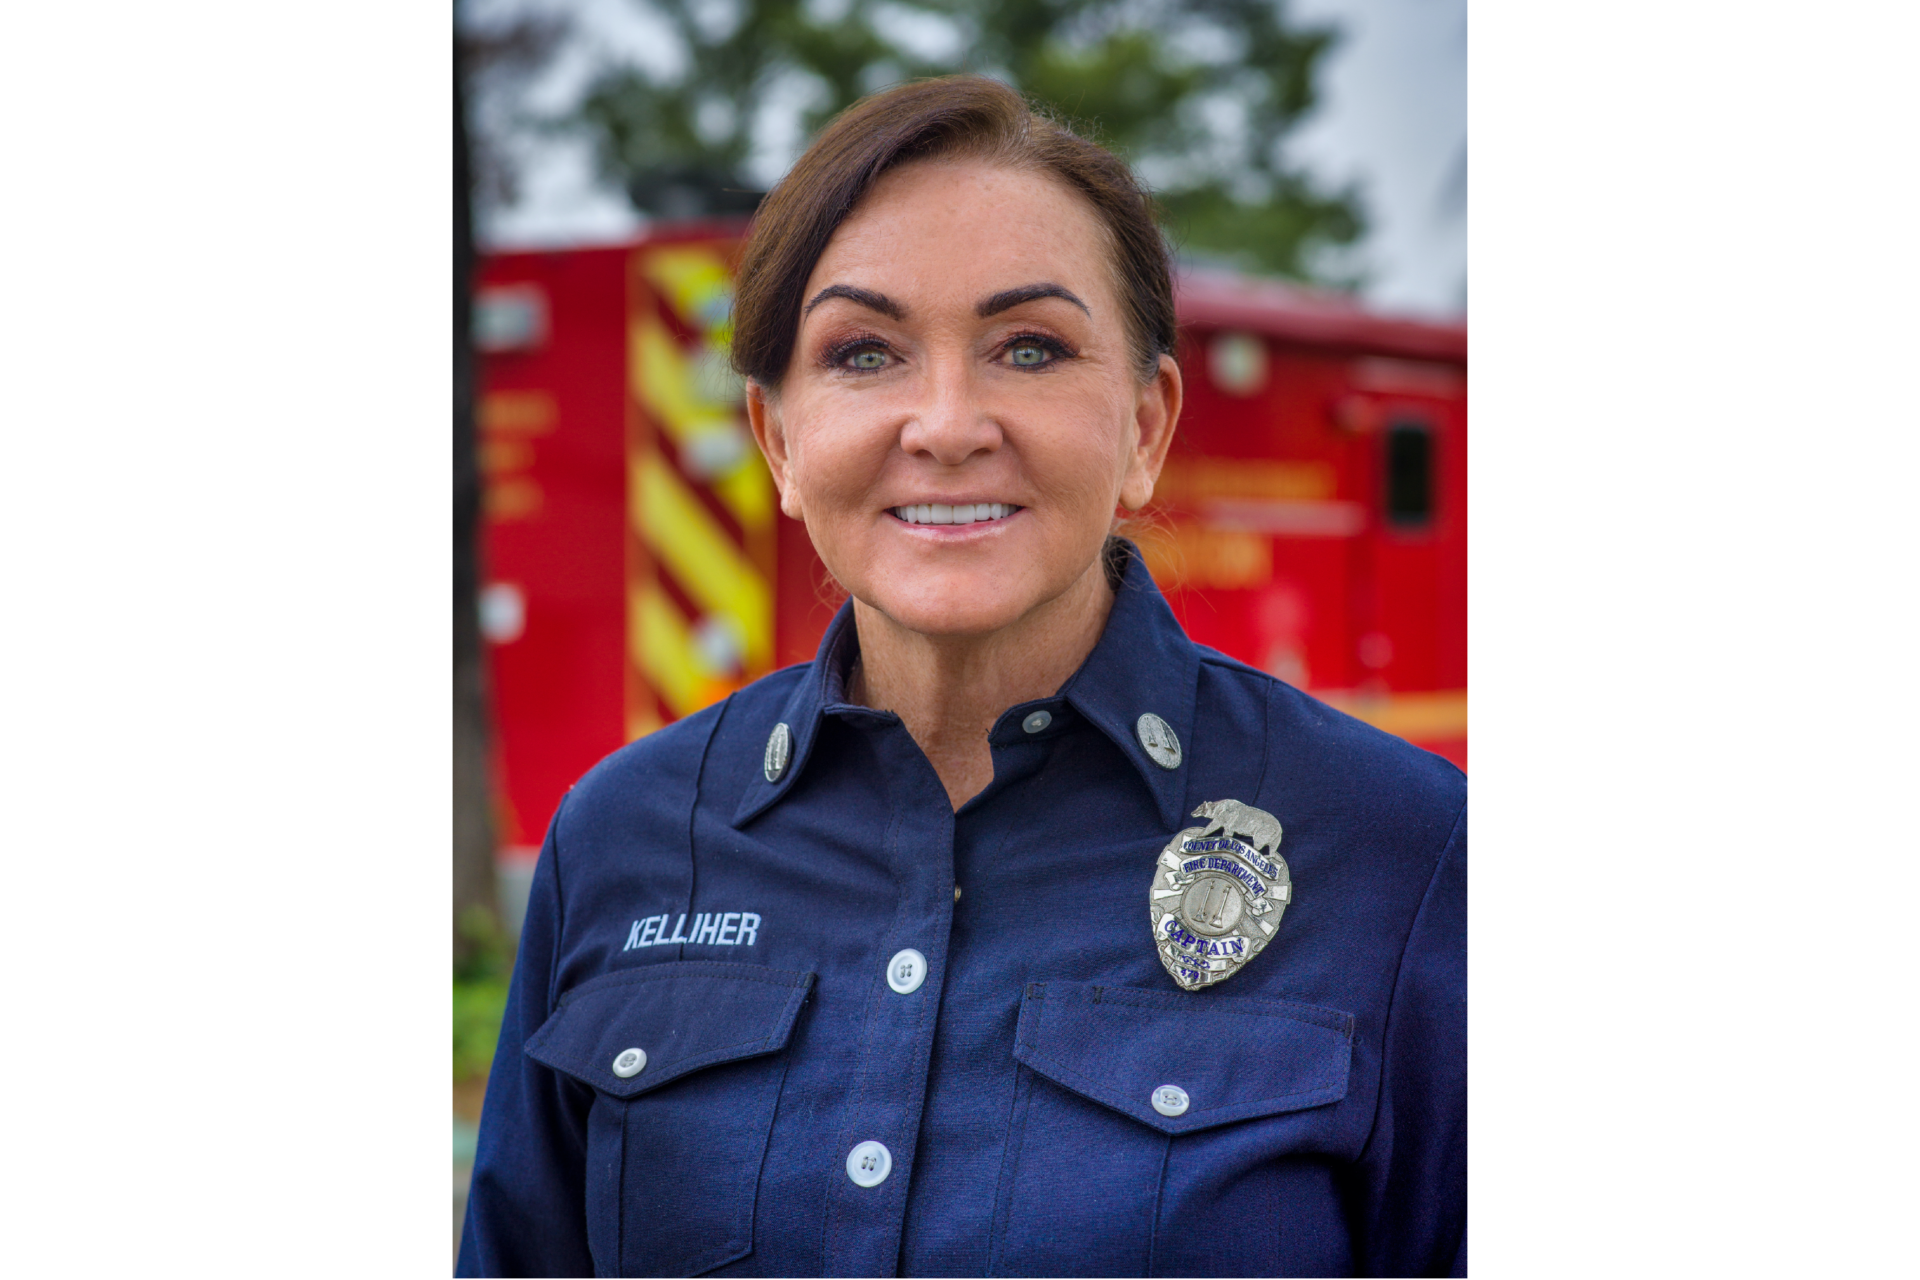 On Monday, May 16, 2022, the Los Angeles County Fire Department’s (LACoFD) first female fire captain to manage the Public Information Office (PIO) assumed her new role. Captain Sheila Kelliher took over the PIO role after the recent promotion of Battalion Chief Ron Haralson.